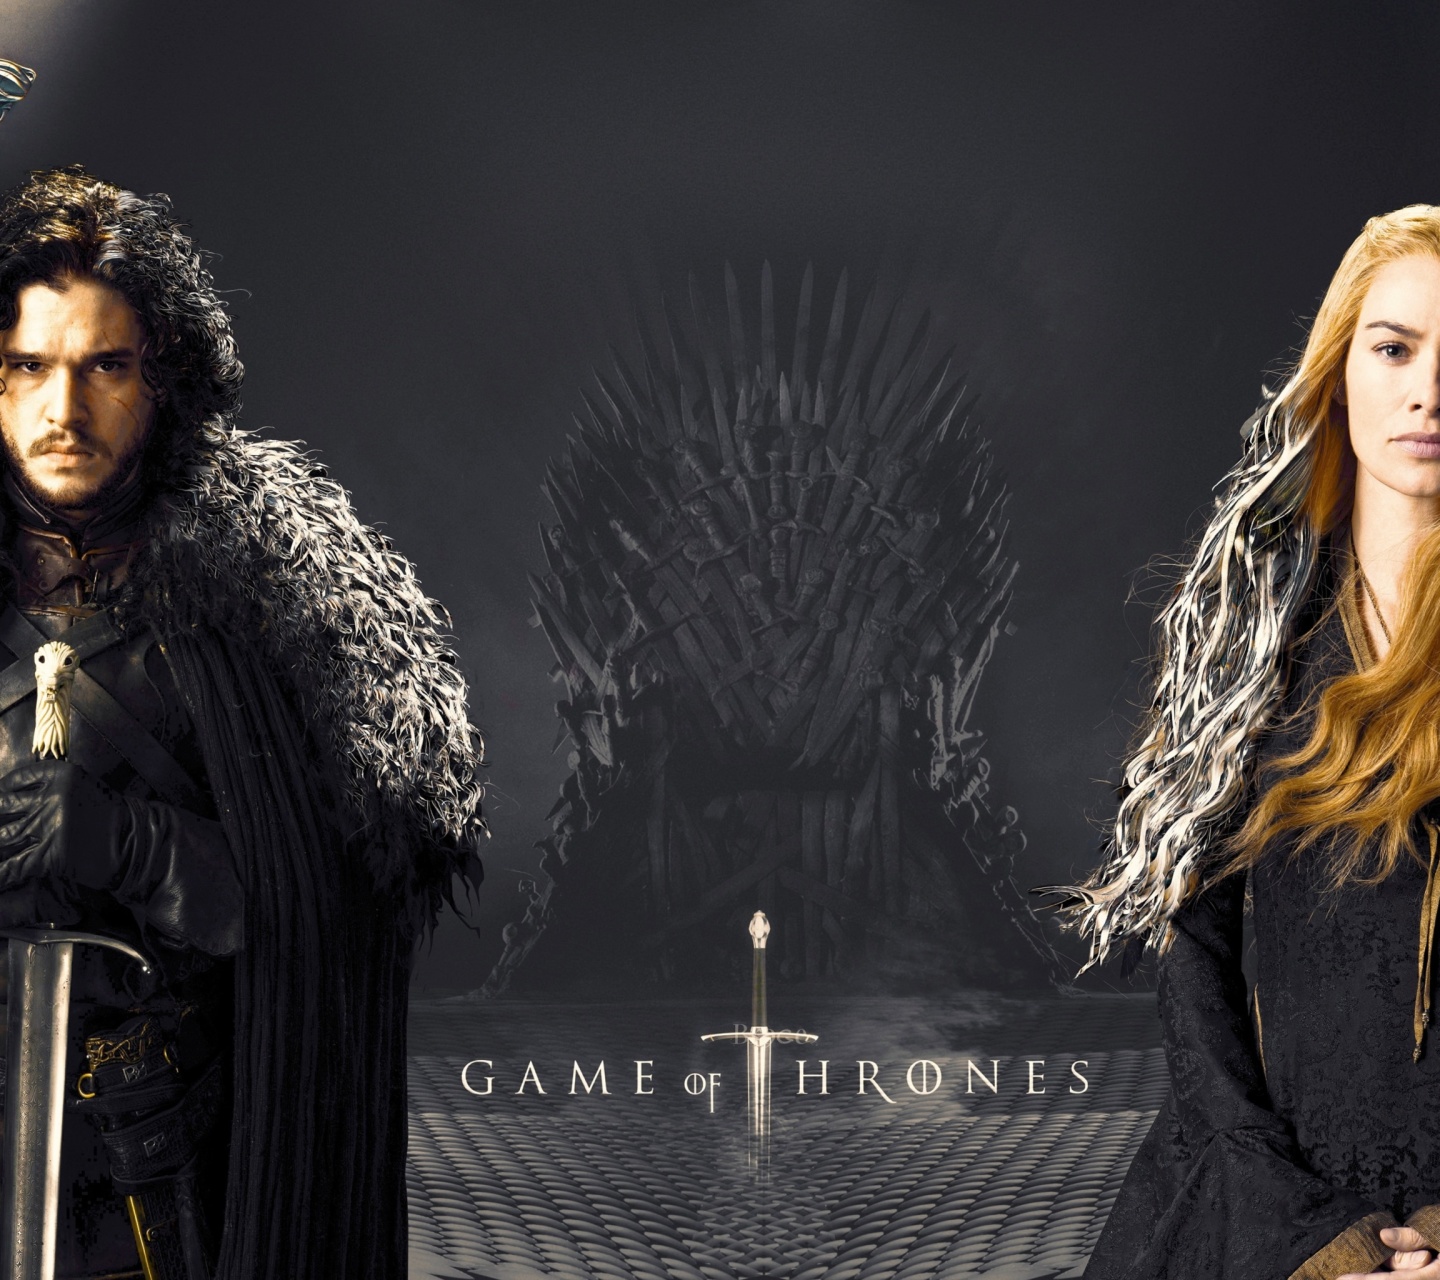 Game Of Thrones actors Jon Snow and Cersei Lannister wallpaper 1440x1280